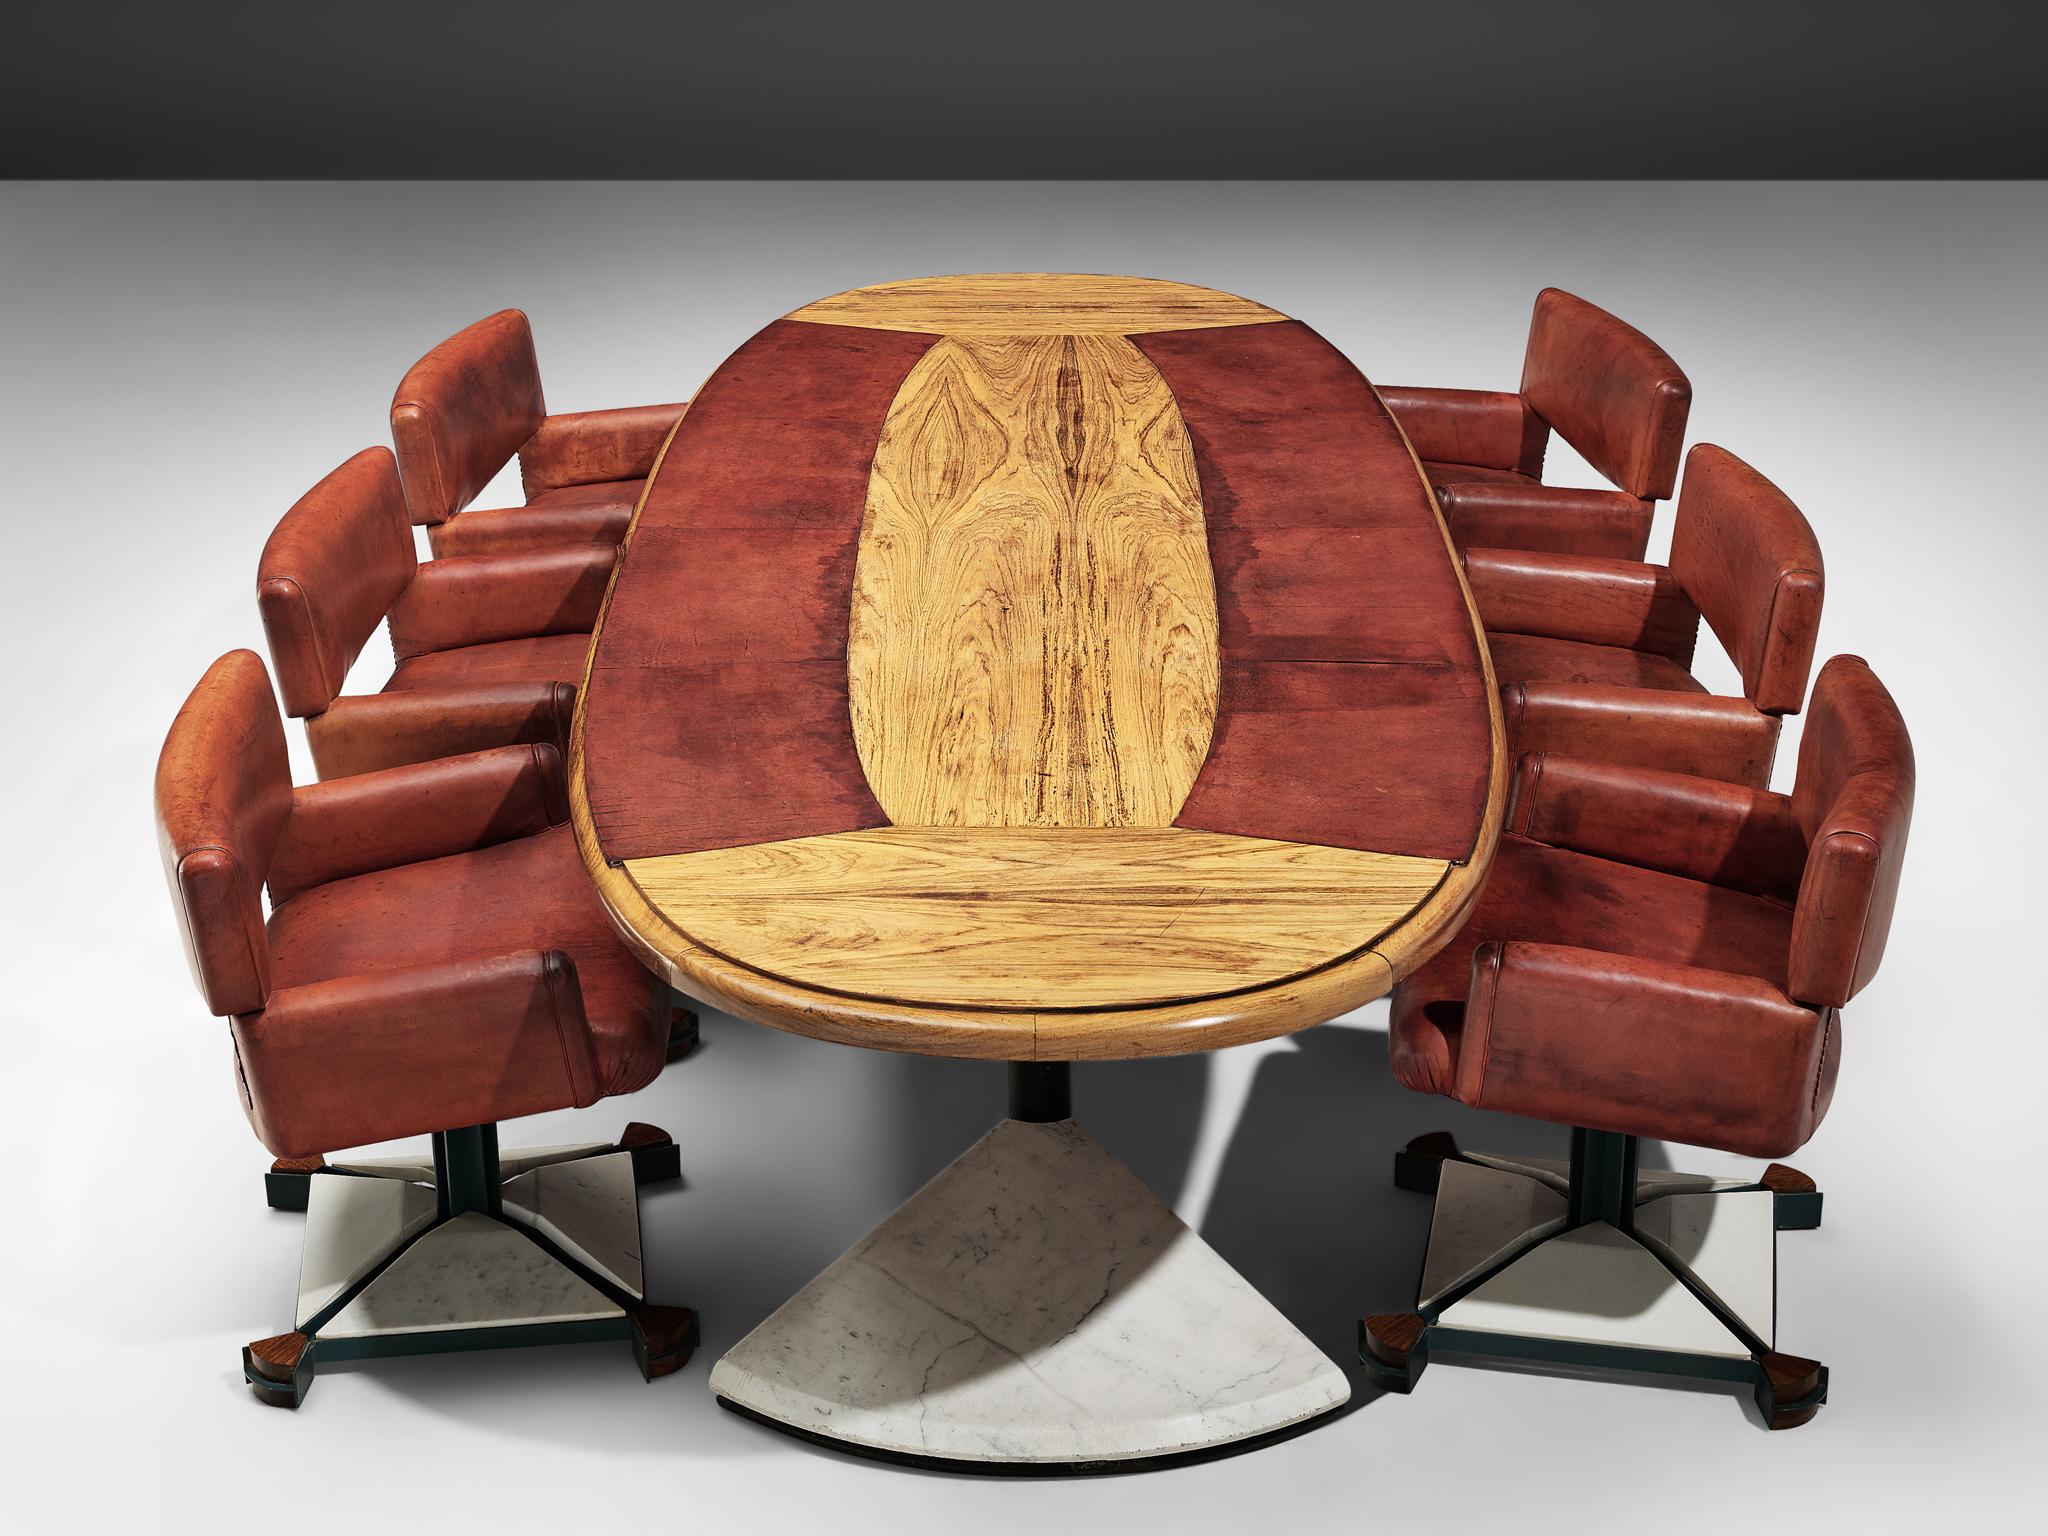 Set of conference table and six chairs, marble, walnut, metal, and leather, Italy, 1970s.

Striking oval table that can be used as conference table or large dining table. Despite being made out of different materials, a beautiful balance is